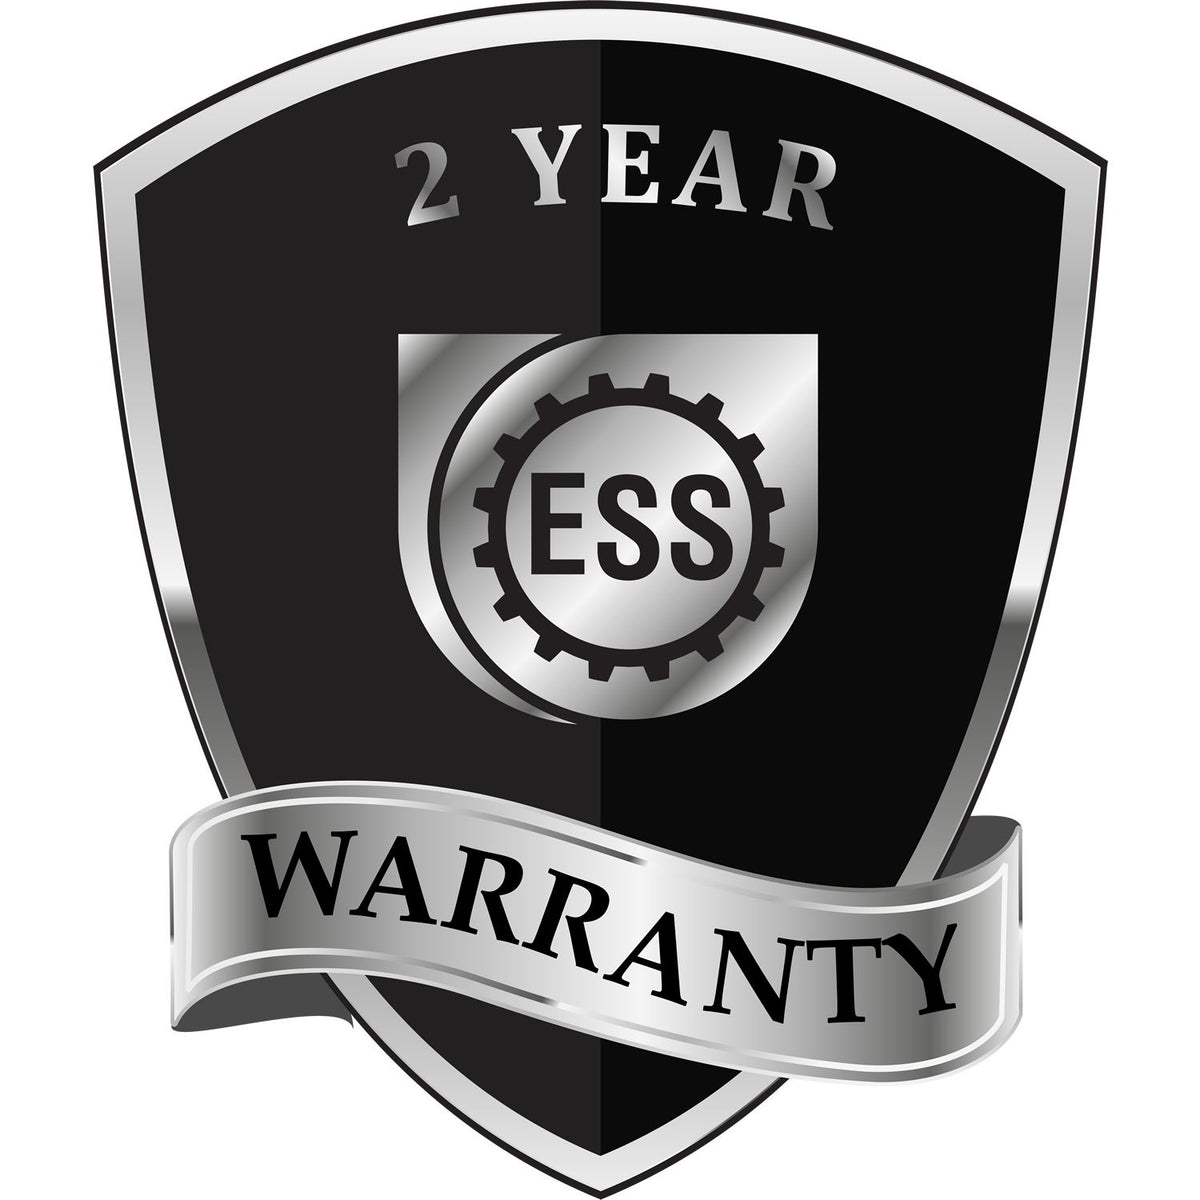 A black and silver badge or emblem showing warranty information for the Heavy Duty Cast Iron North Dakota Geologist Seal Embosser